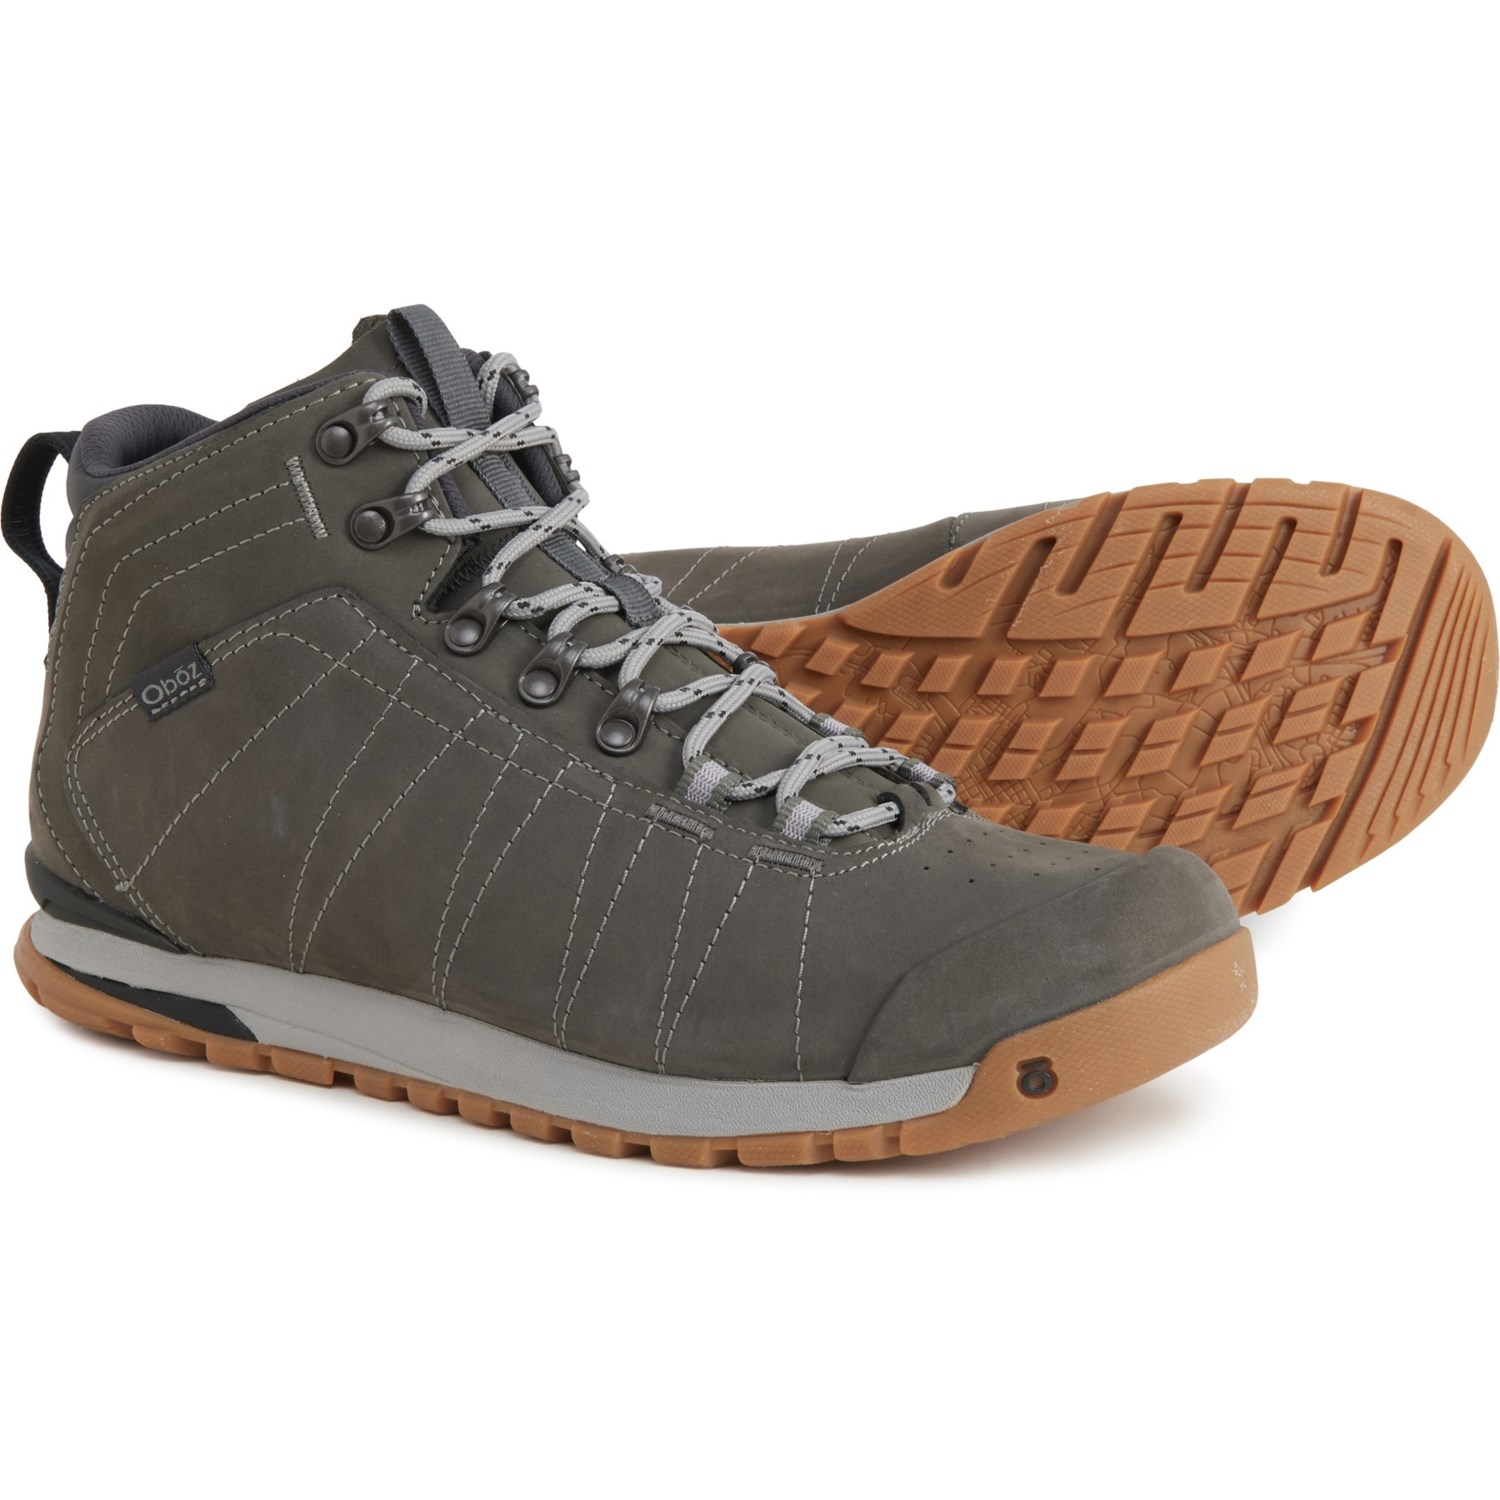 Oboz Footwear Bozeman Mid Hiking Boots (For Men) - Save 40%